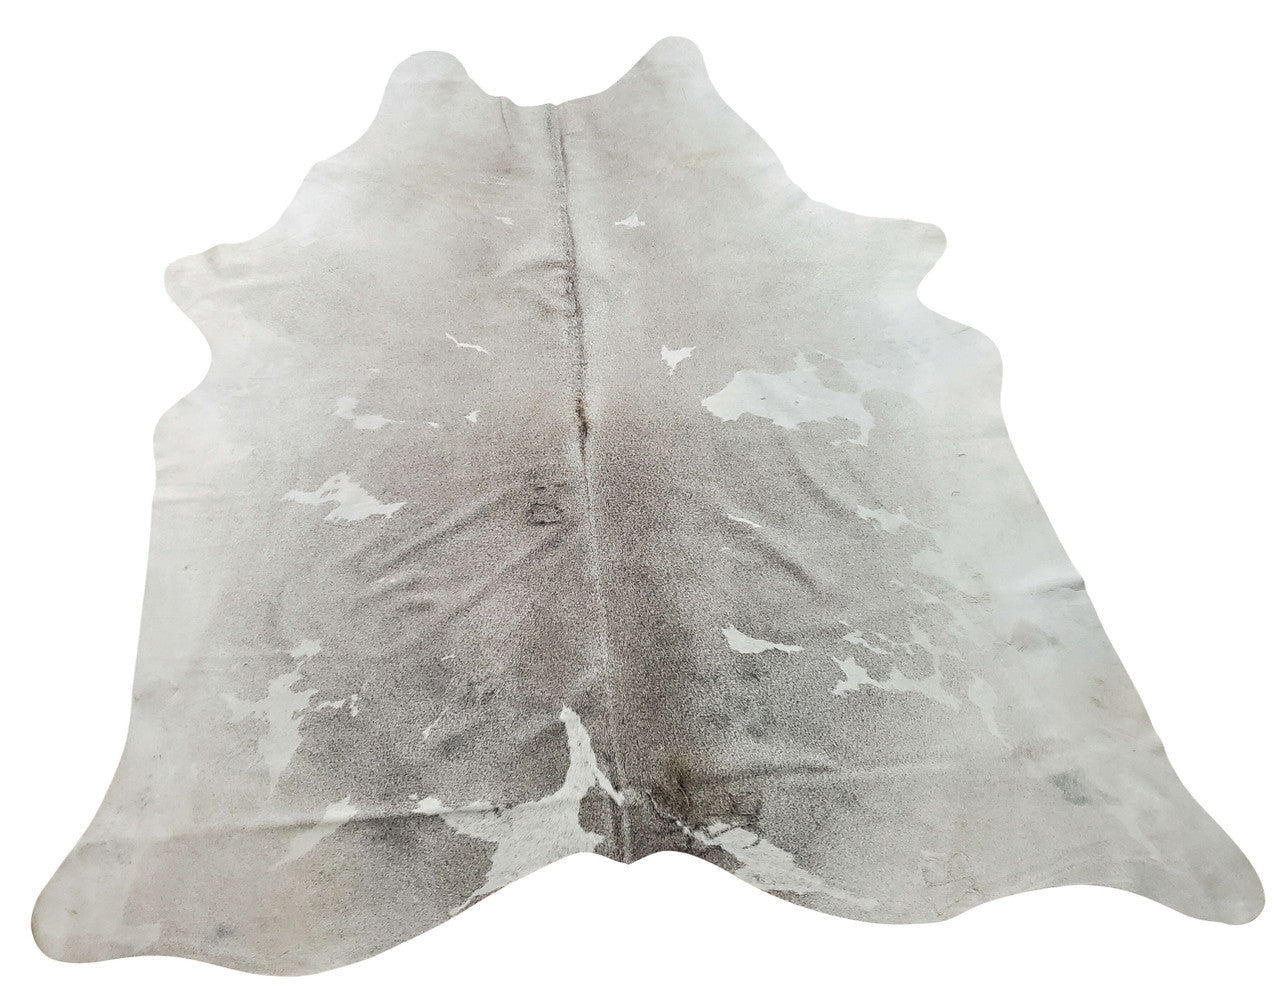 The light grey white color gives an authentic feel to this large cowhide rug.